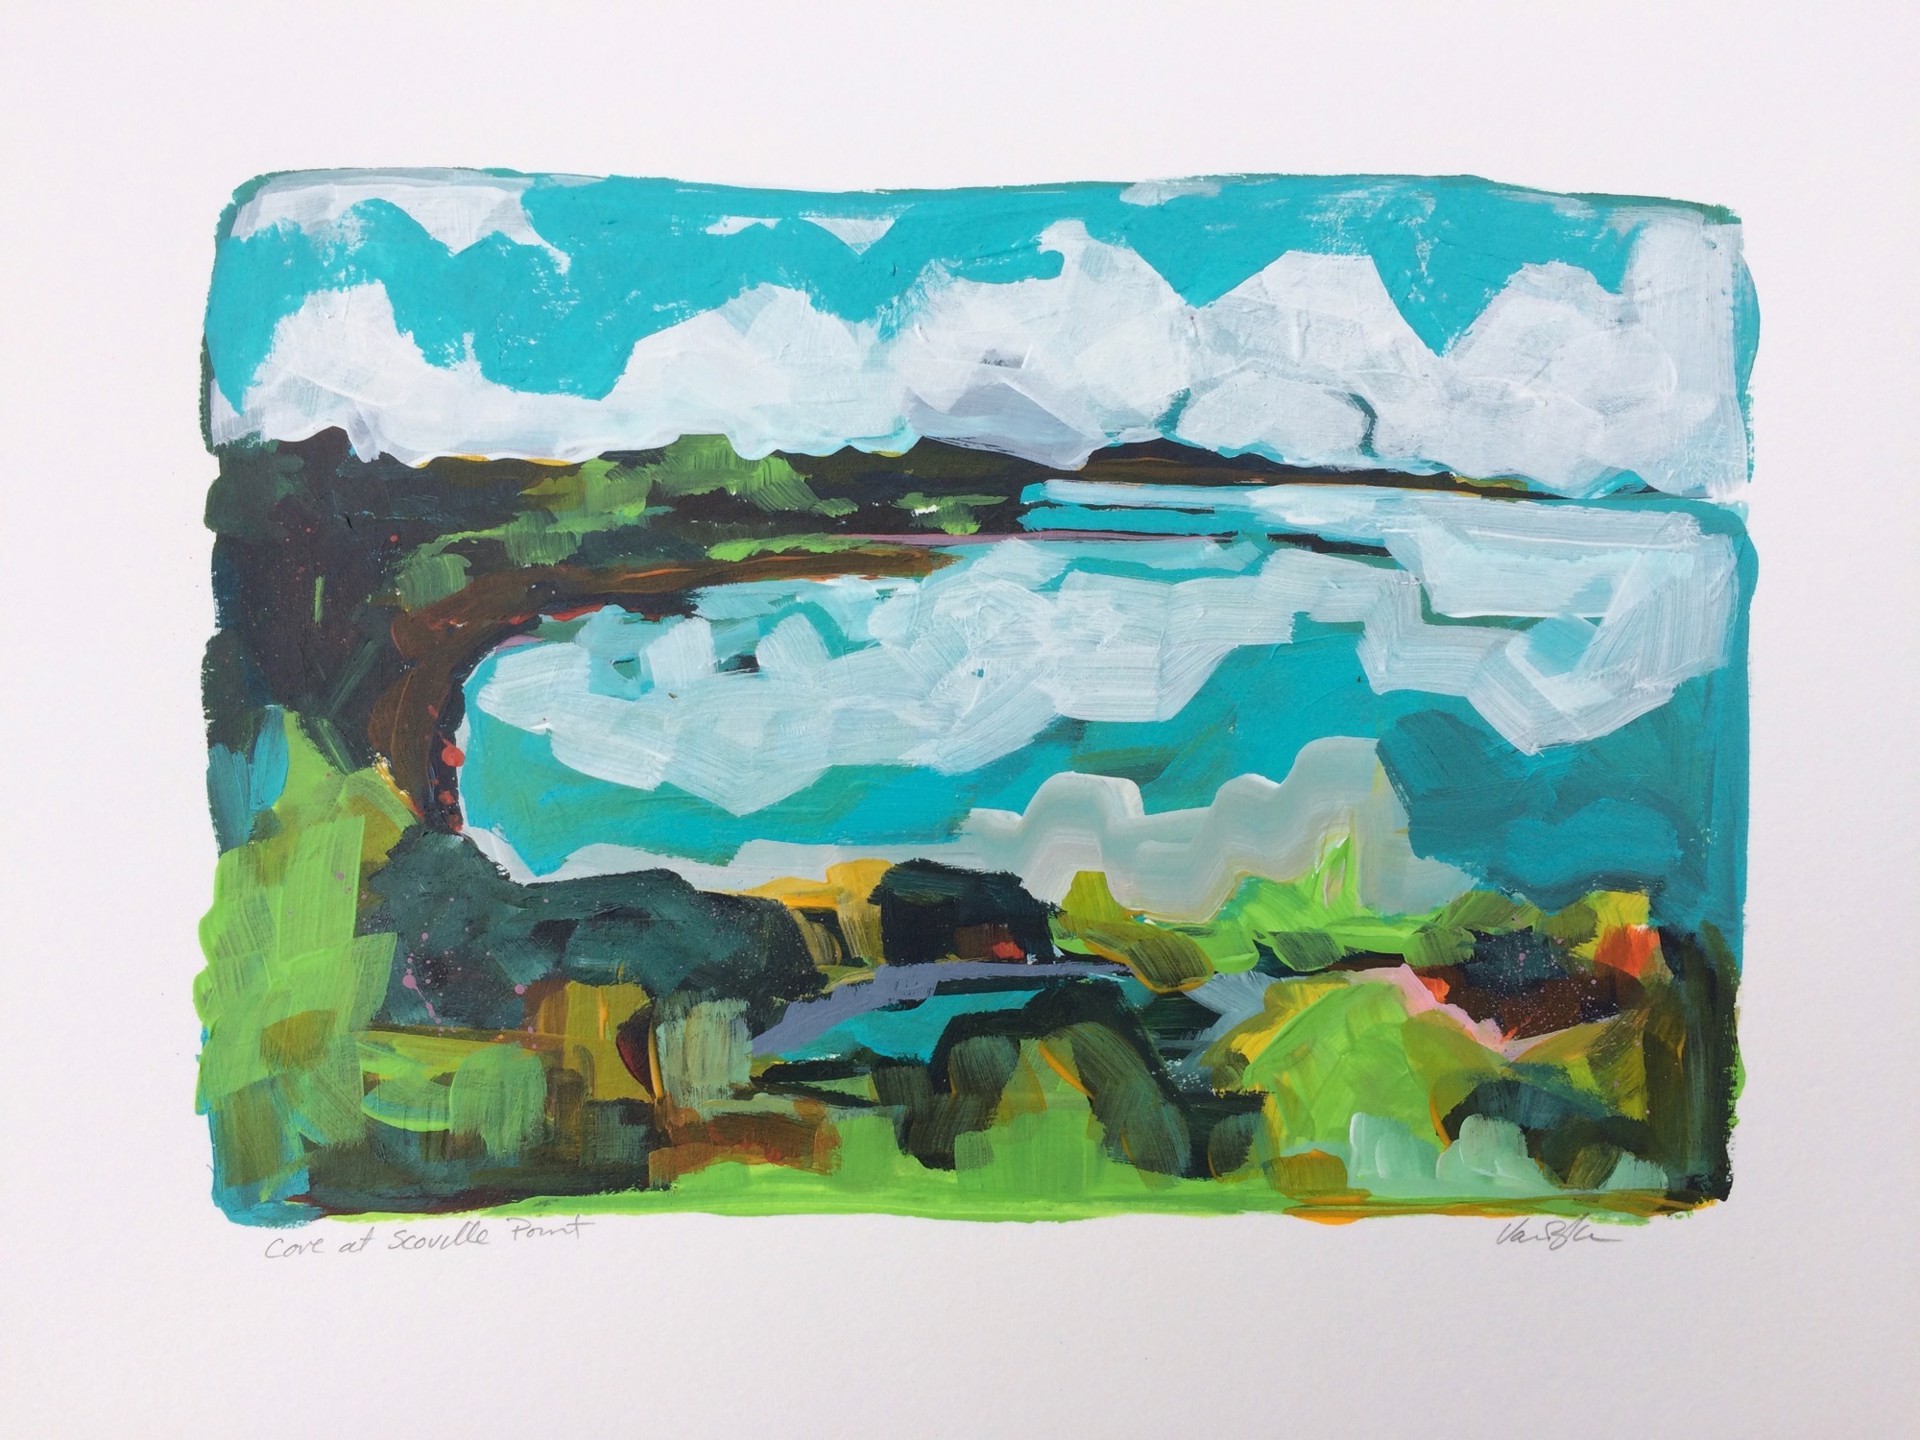 Cove at Scoville Point by Rachael Van Dyke